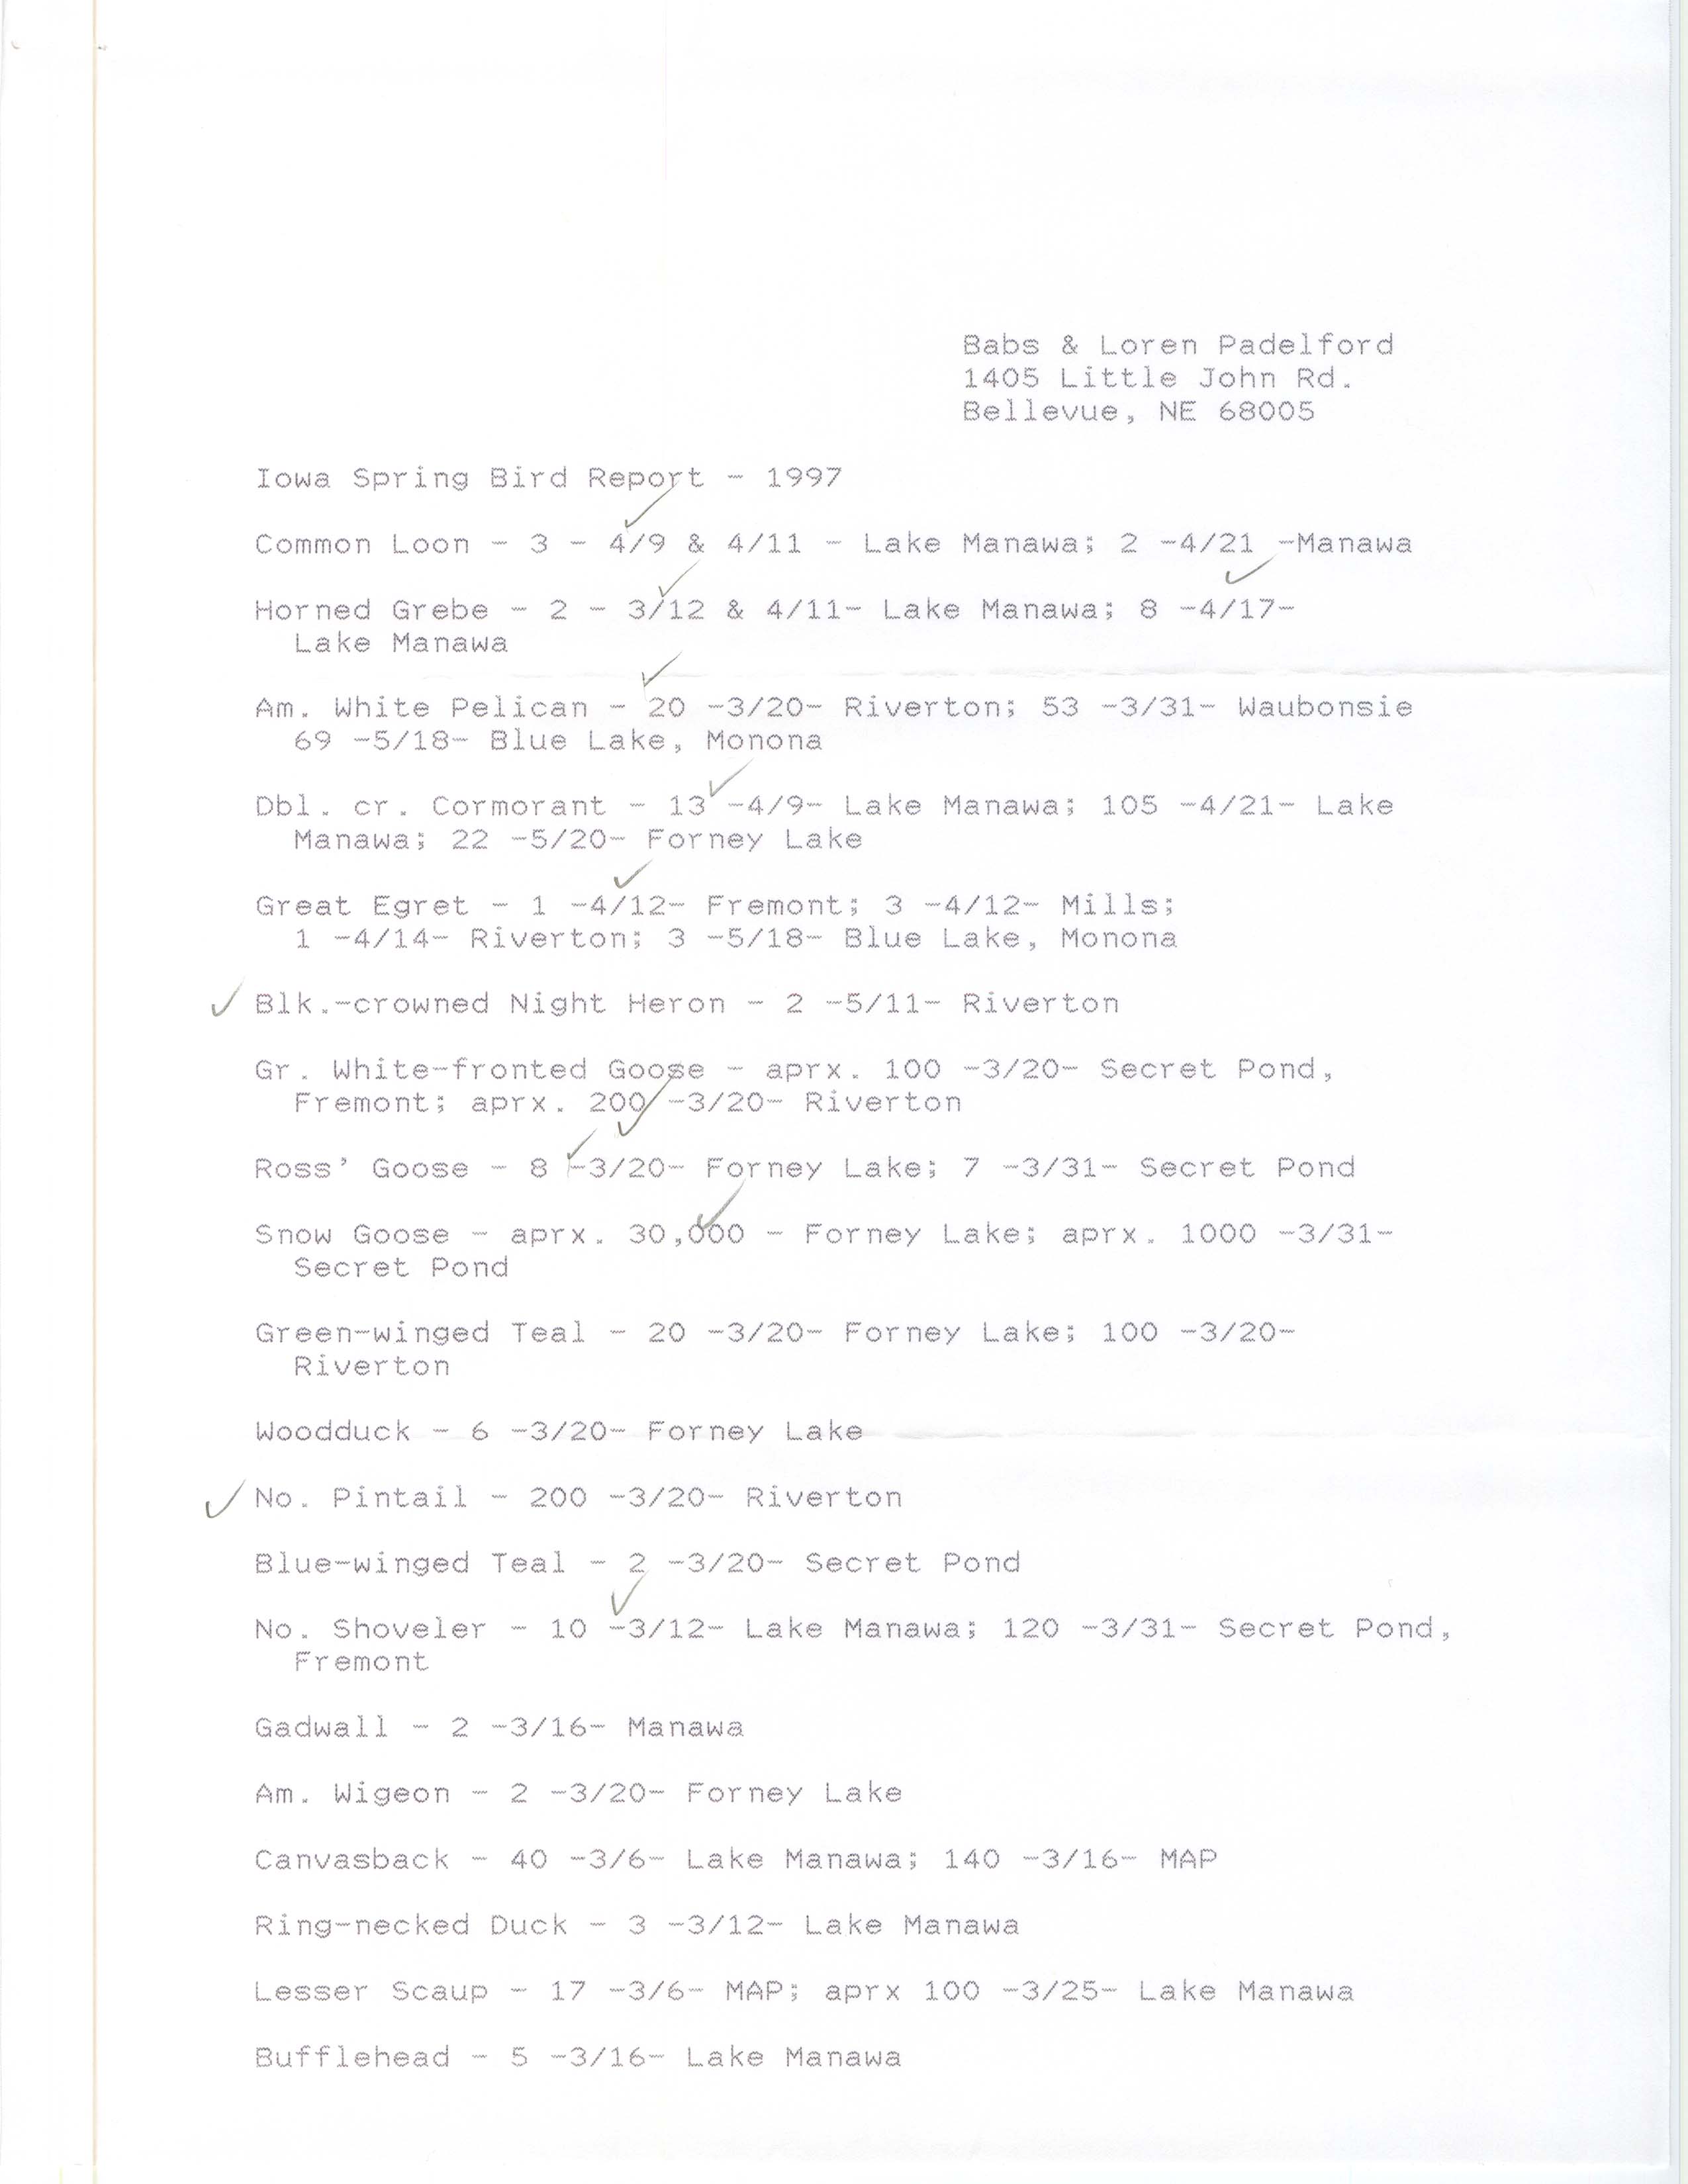 Field notes contributed by Babs Padelford and Loren Padelford, spring 1997